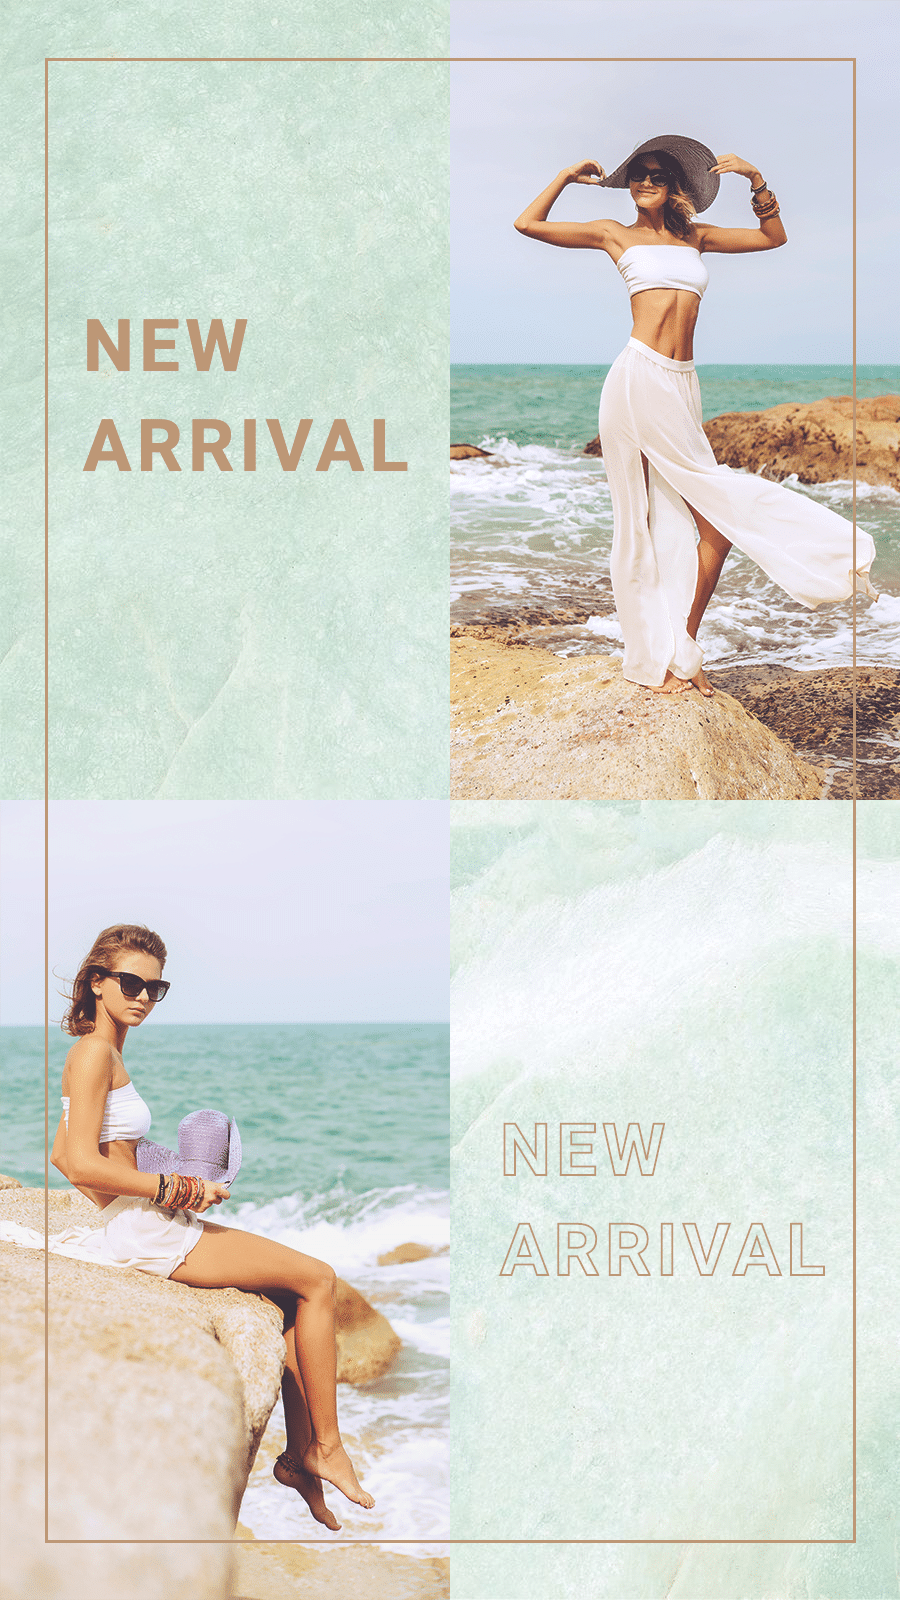 Seaside Simple Fashion Women's Wear New Arrival Display Ecommerce Story预览效果